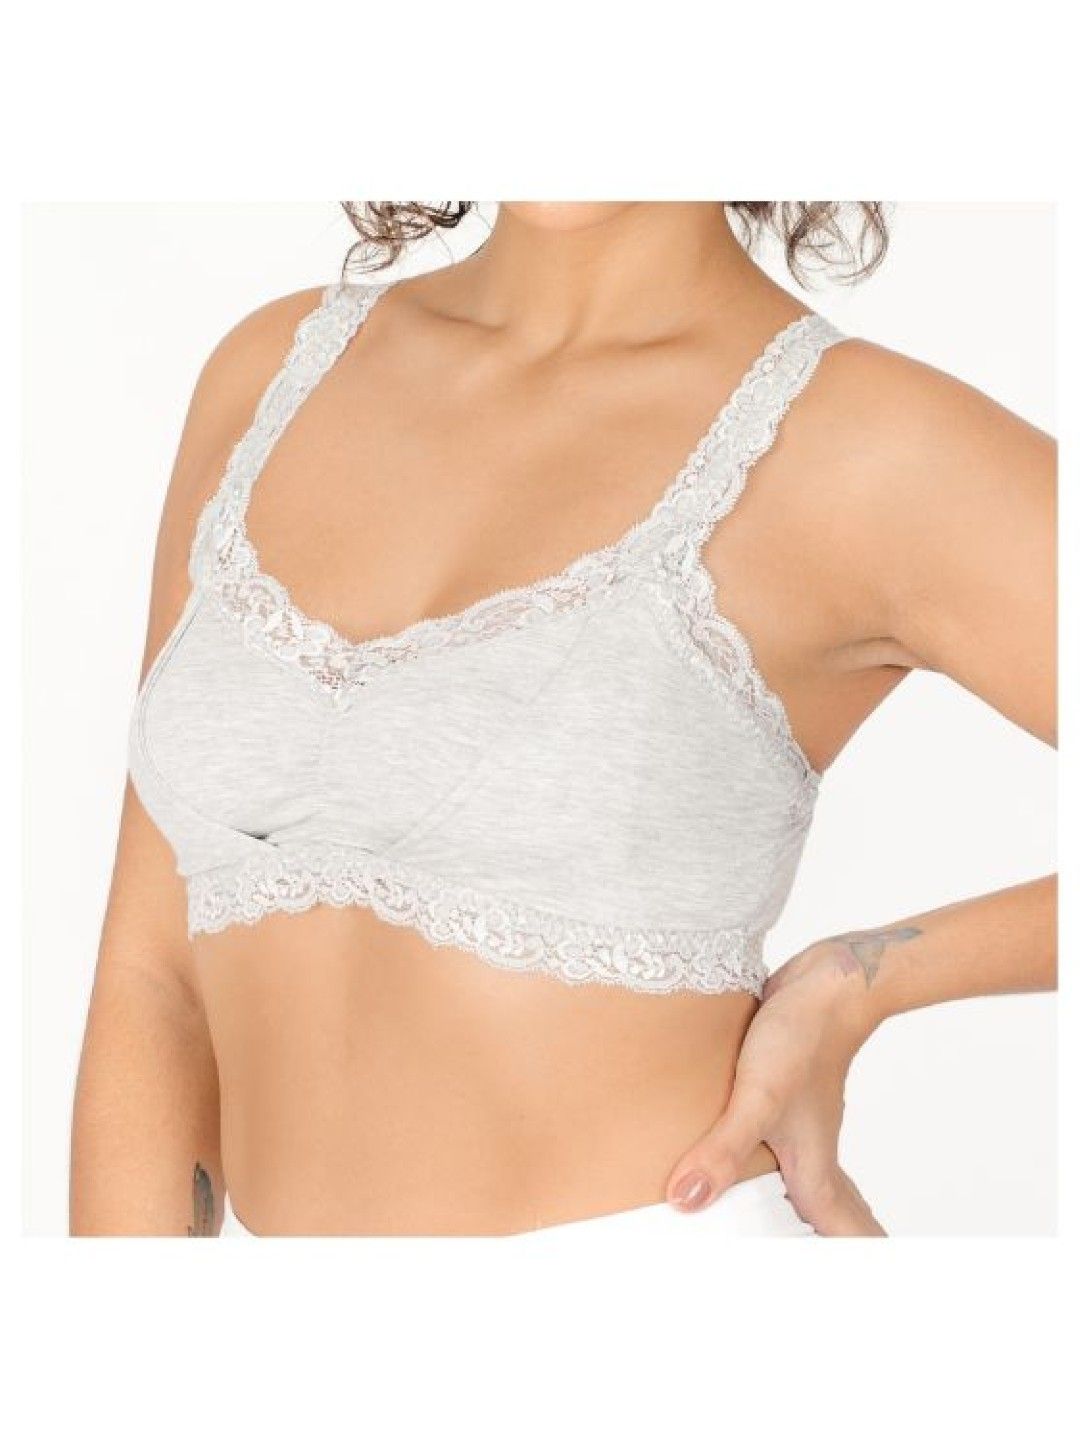 Lily of the Valley Pumping Bralette